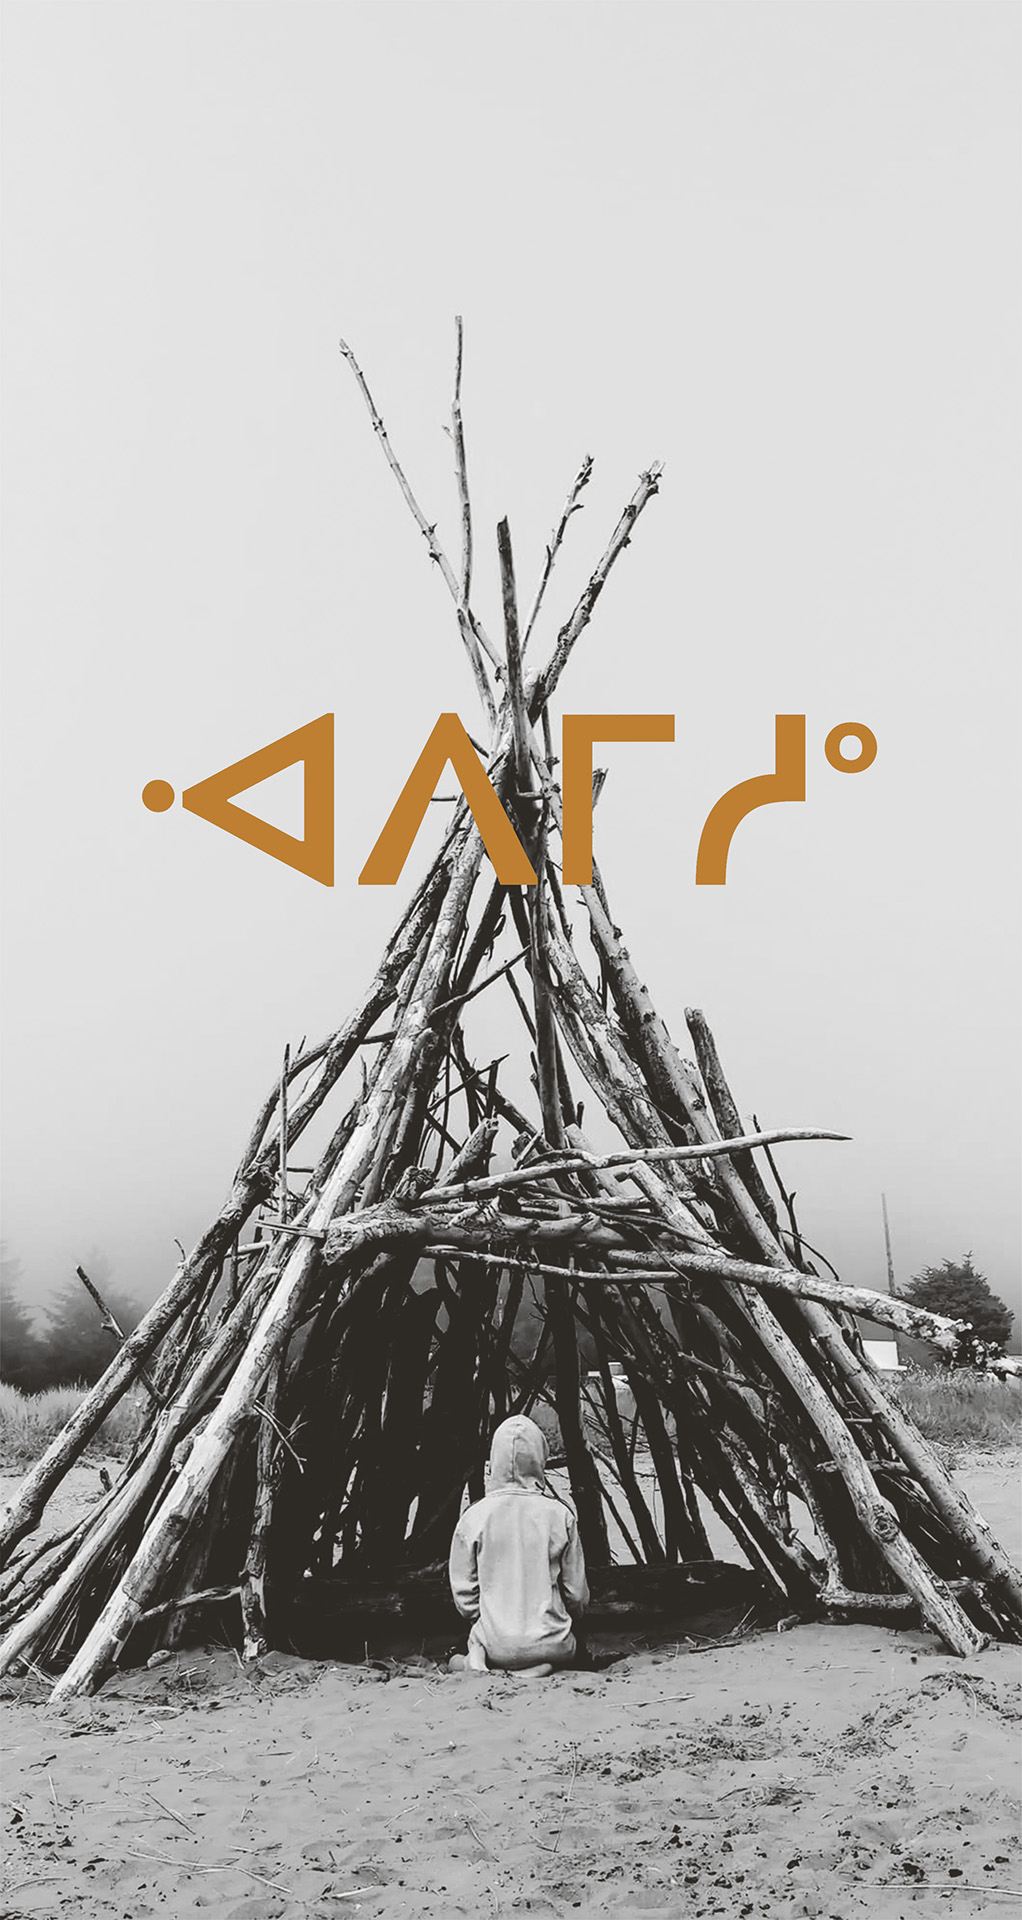 A person with their back to the camera sits in a wooden tipi on sand. Cree syllabics are overlayed